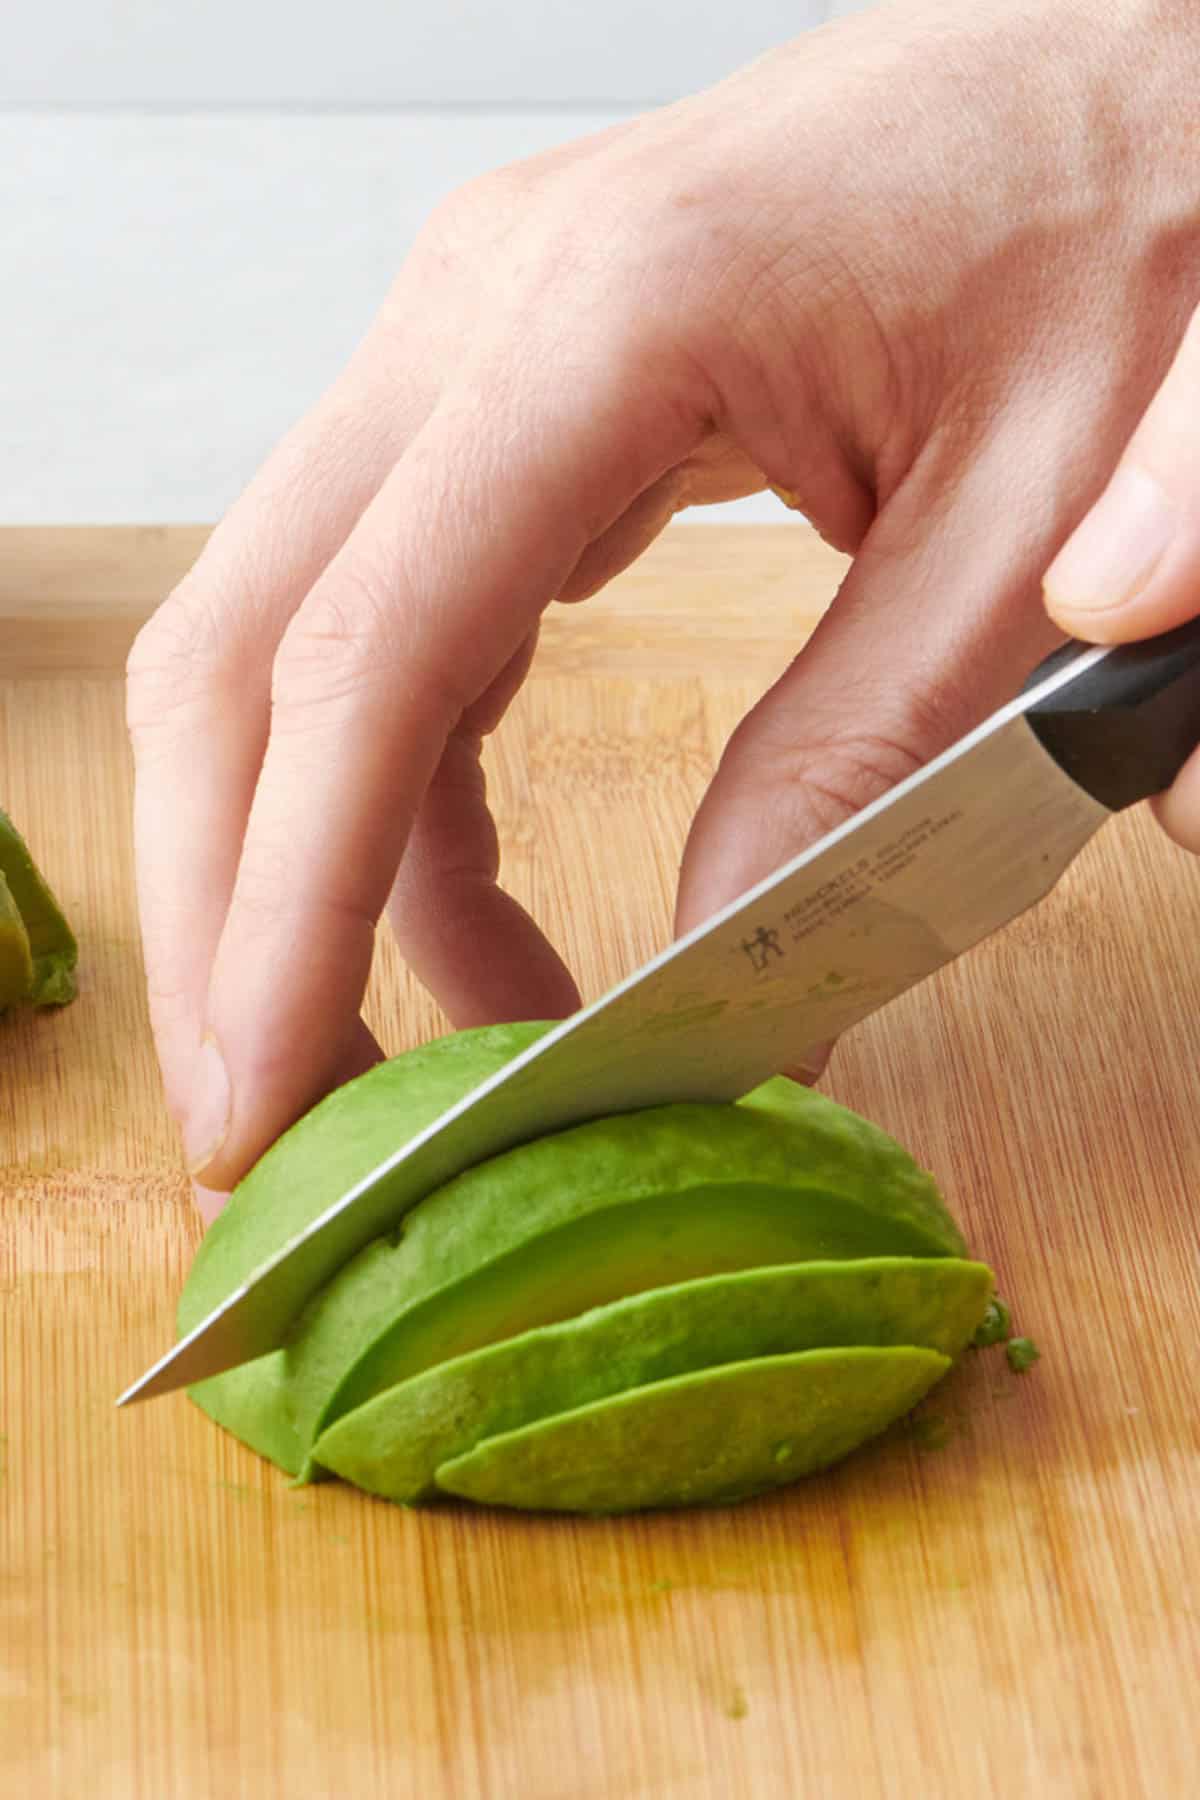 https://feelgoodfoodie.net/wp-content/uploads/2023/04/How-to-Cut-an-Avocado-19.jpg